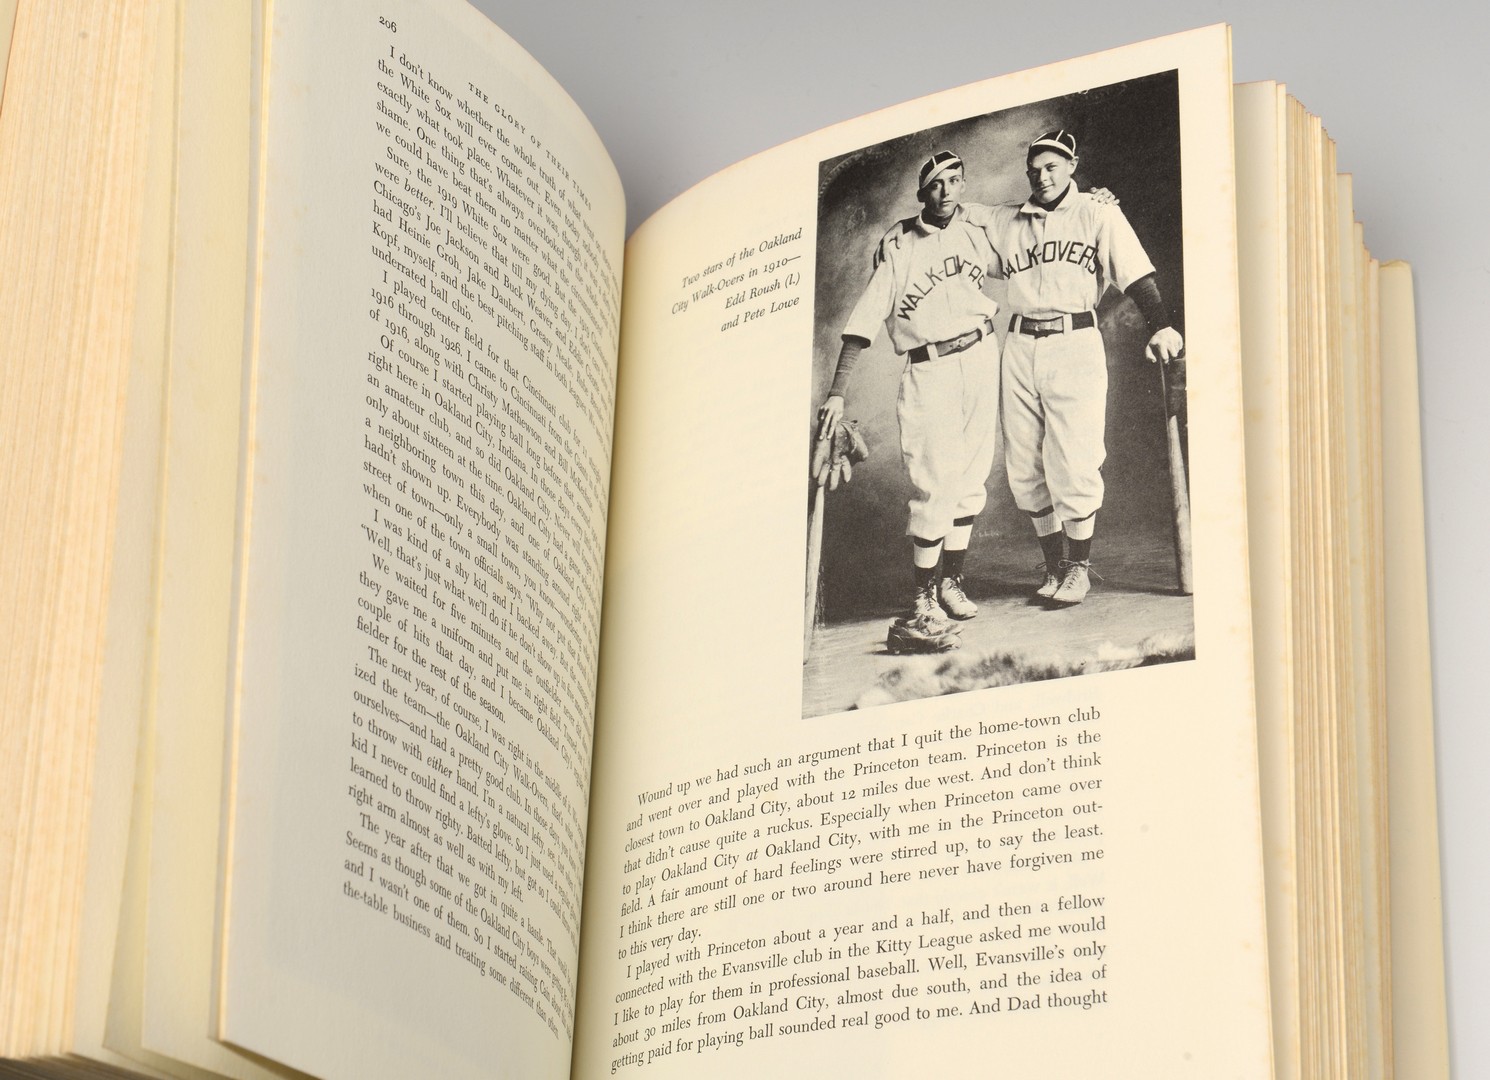 Lot 787: Baseball Themed Book, Glory of Their Times